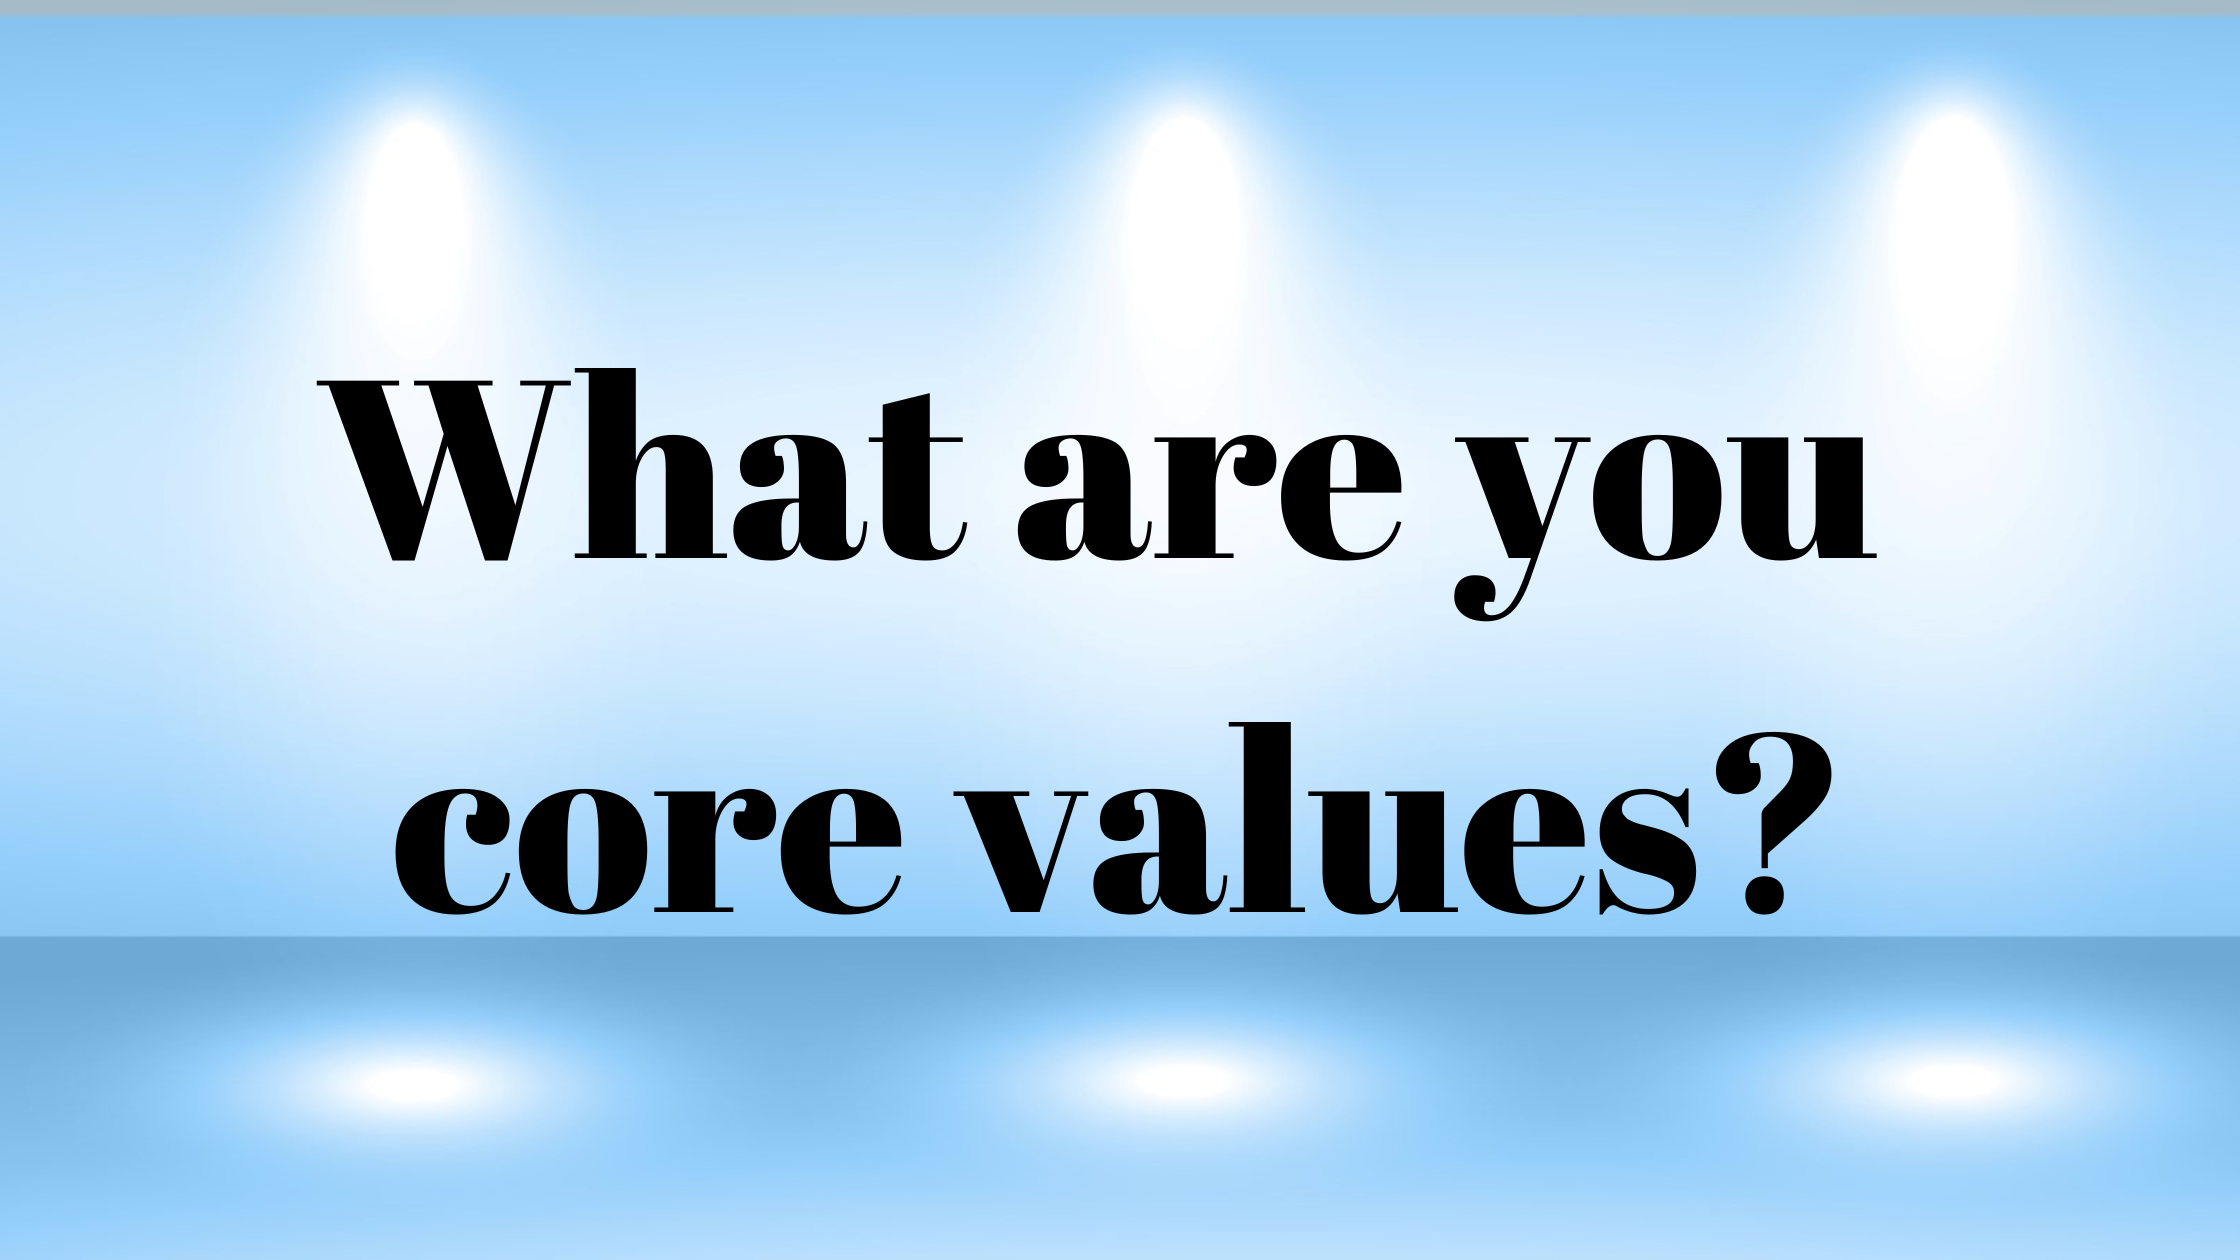 what are your core values?